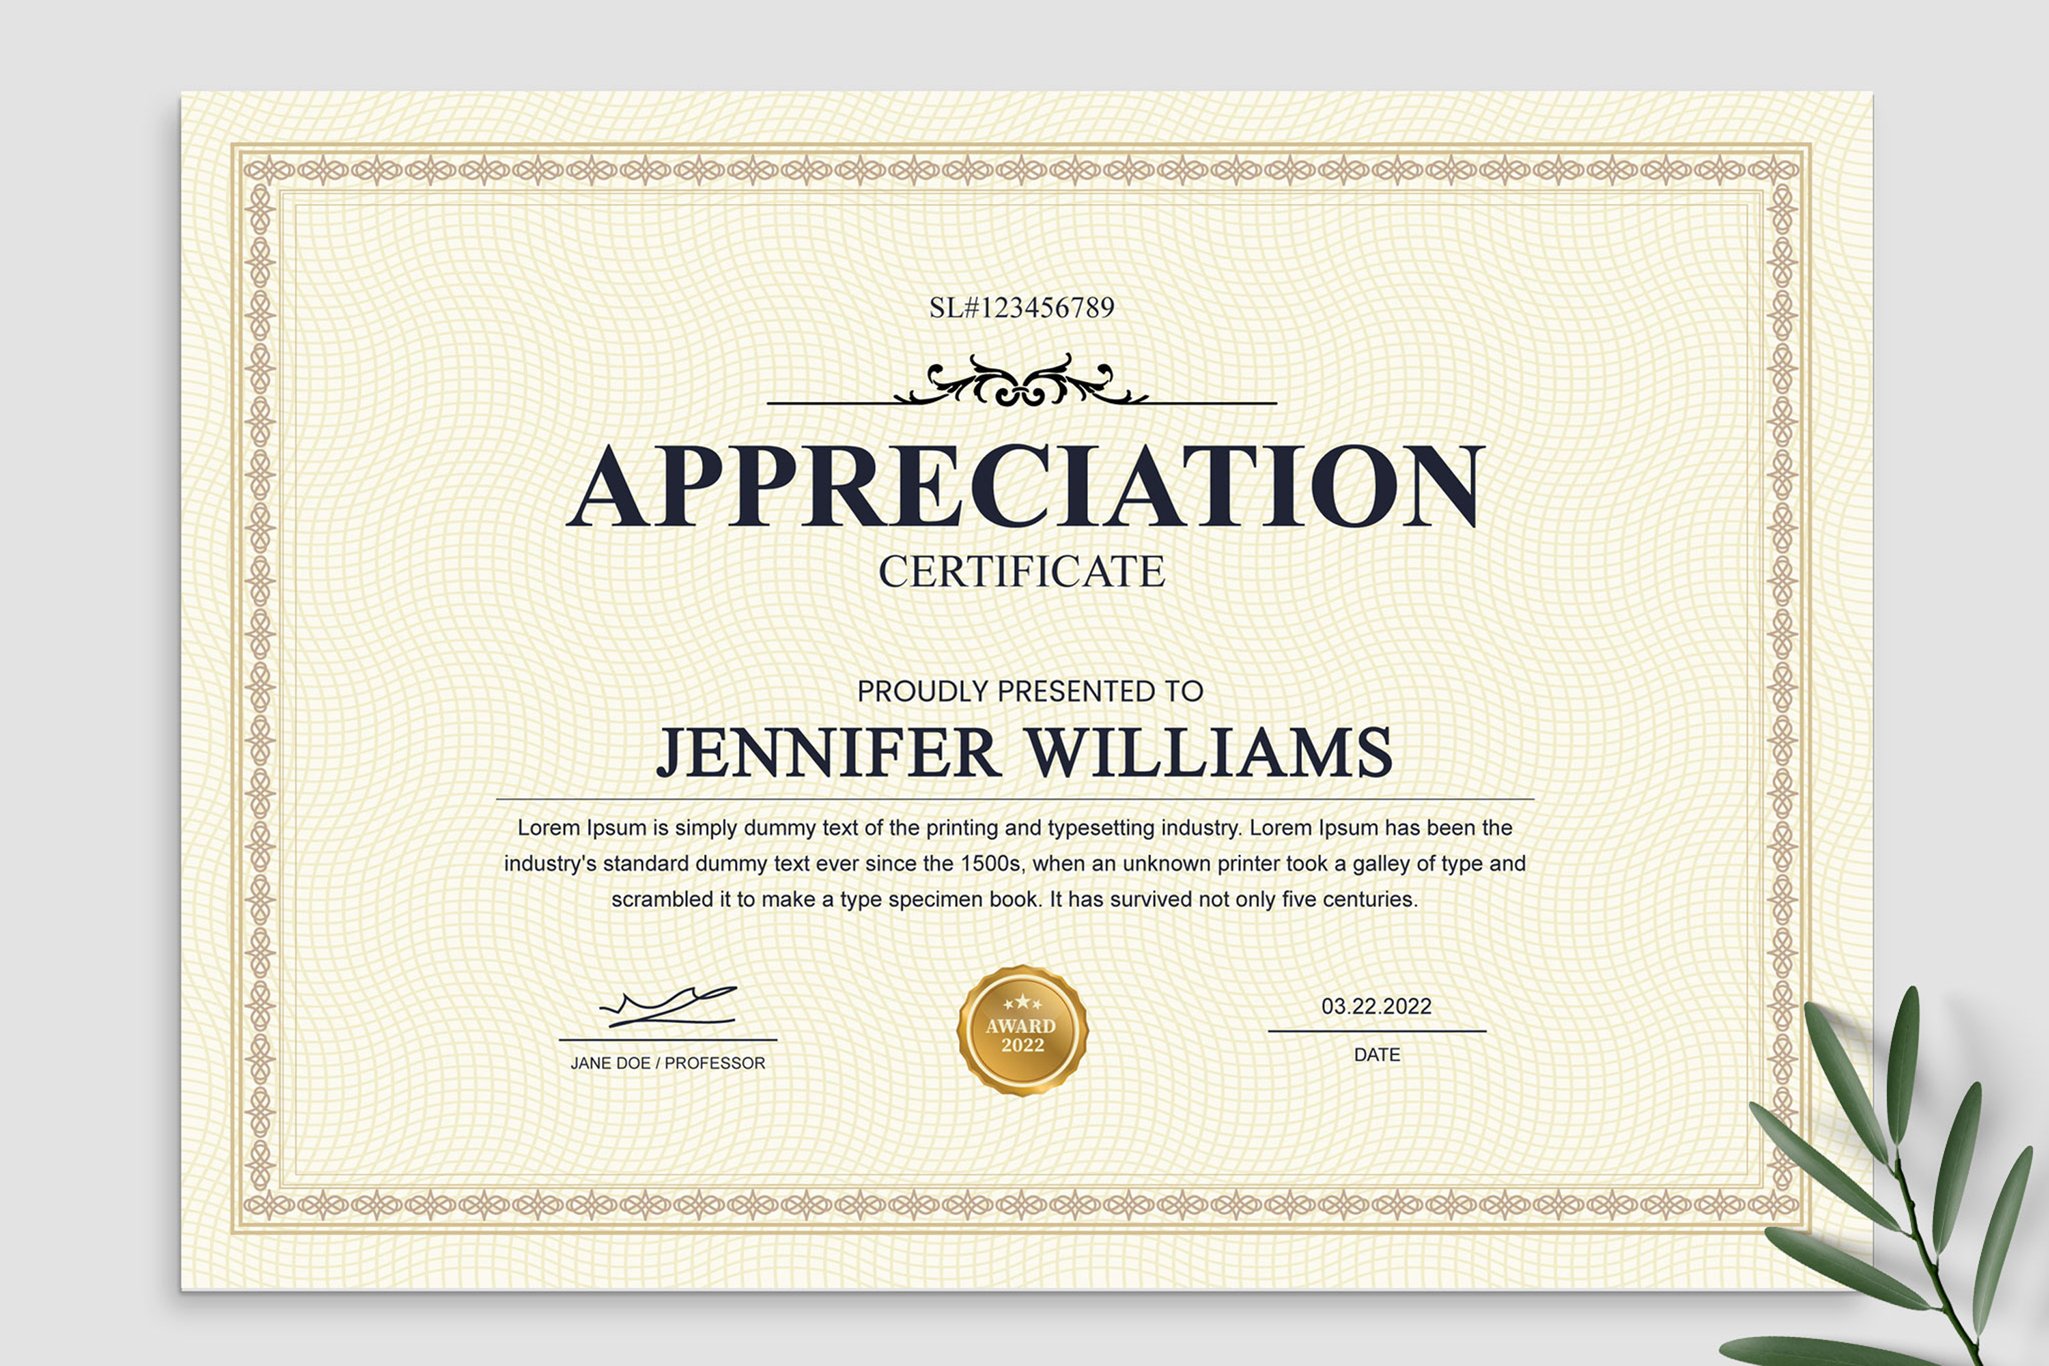 Printable Certificate Template preview image.